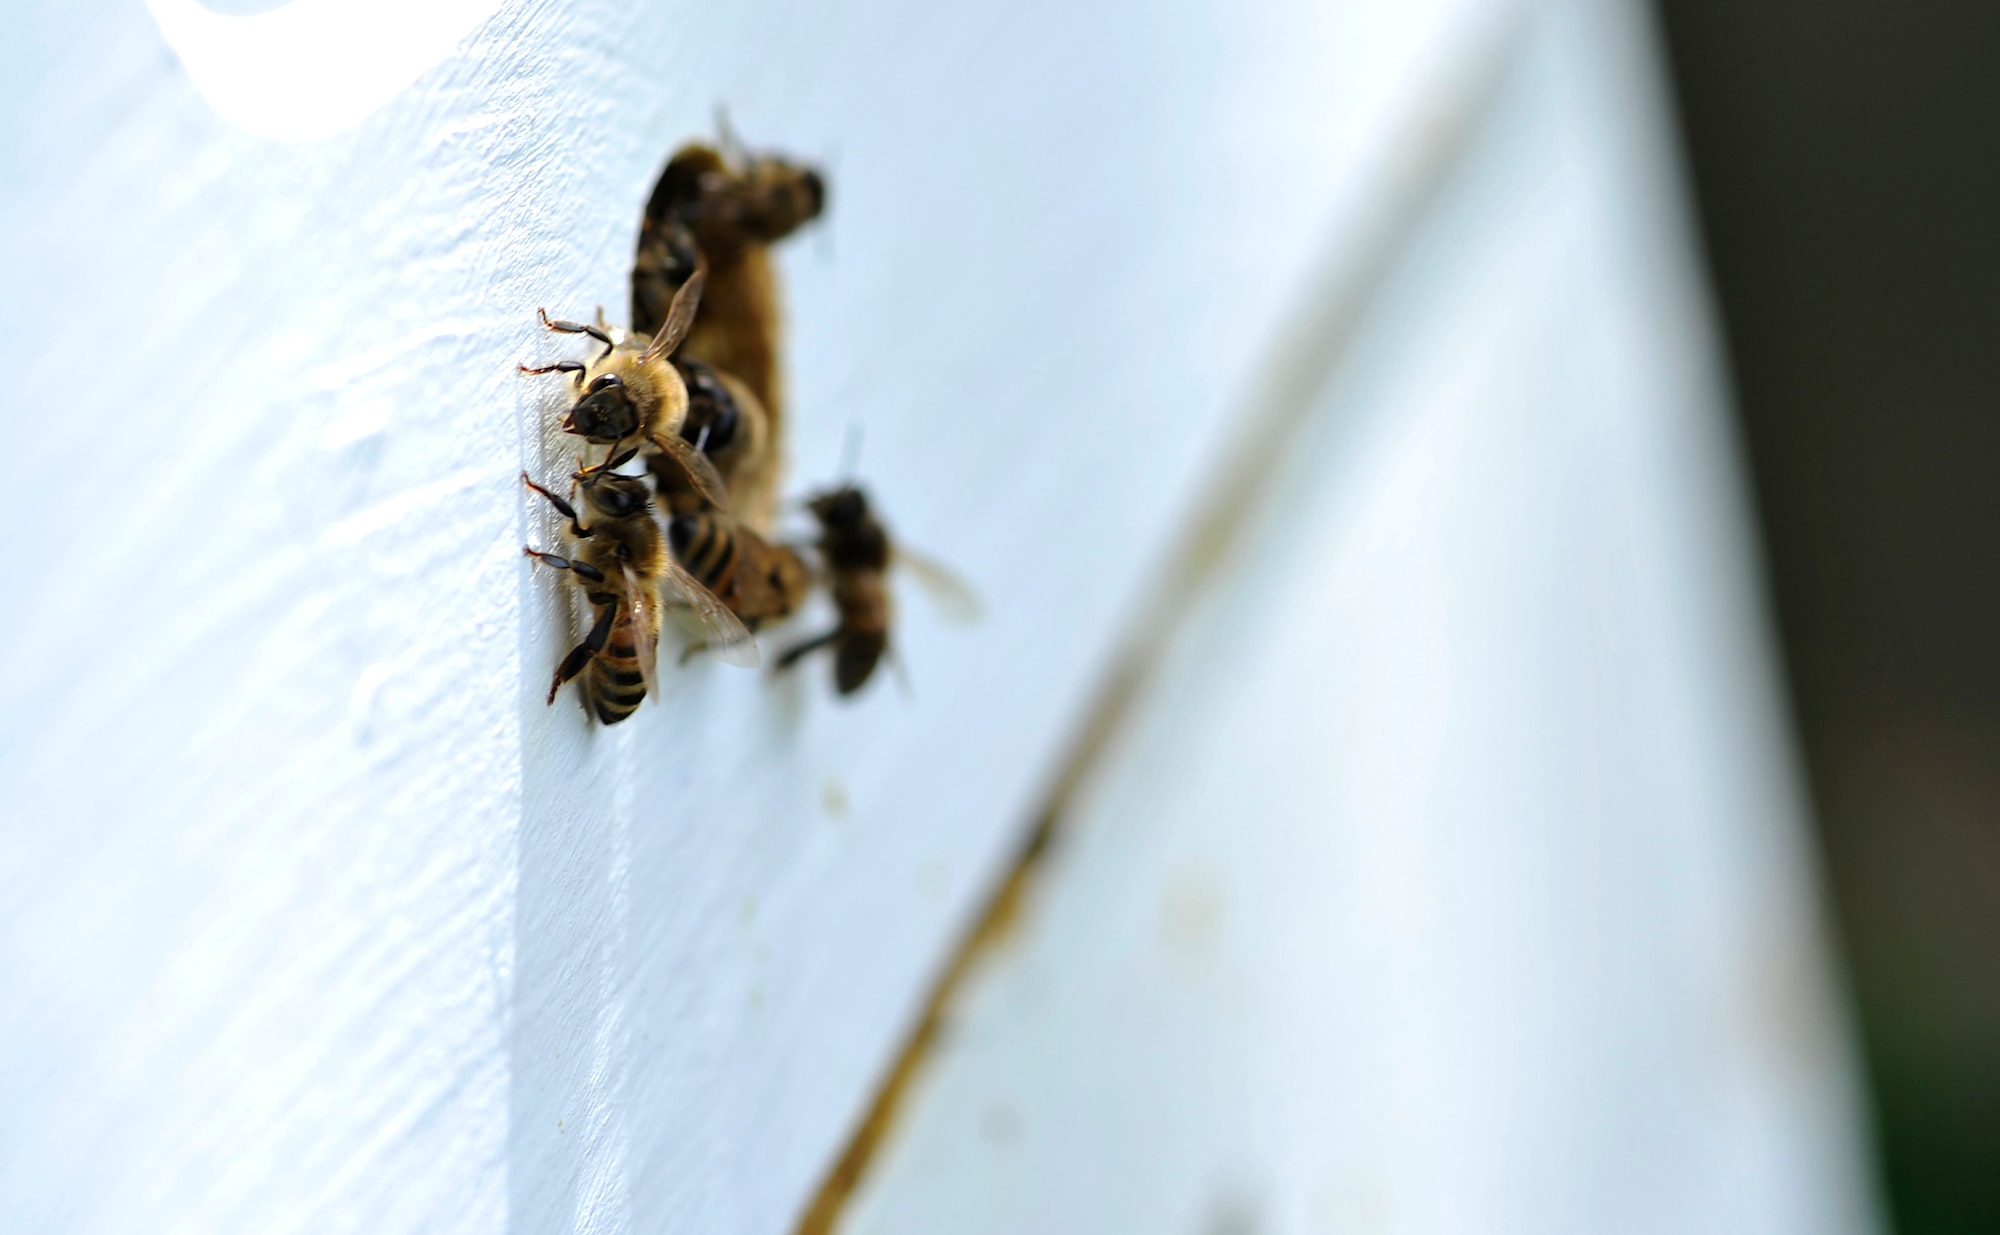 Several honeybees guard the opening to their hive, April 24, 2017, in Derby, Kan. In the hierarchy of a bee colony, worker bees make up the majority of the bees and are responsible for most of the work to maintain and care for the hive. (U.S. Air Force photo/Airman 1st Class Erin McClellan)